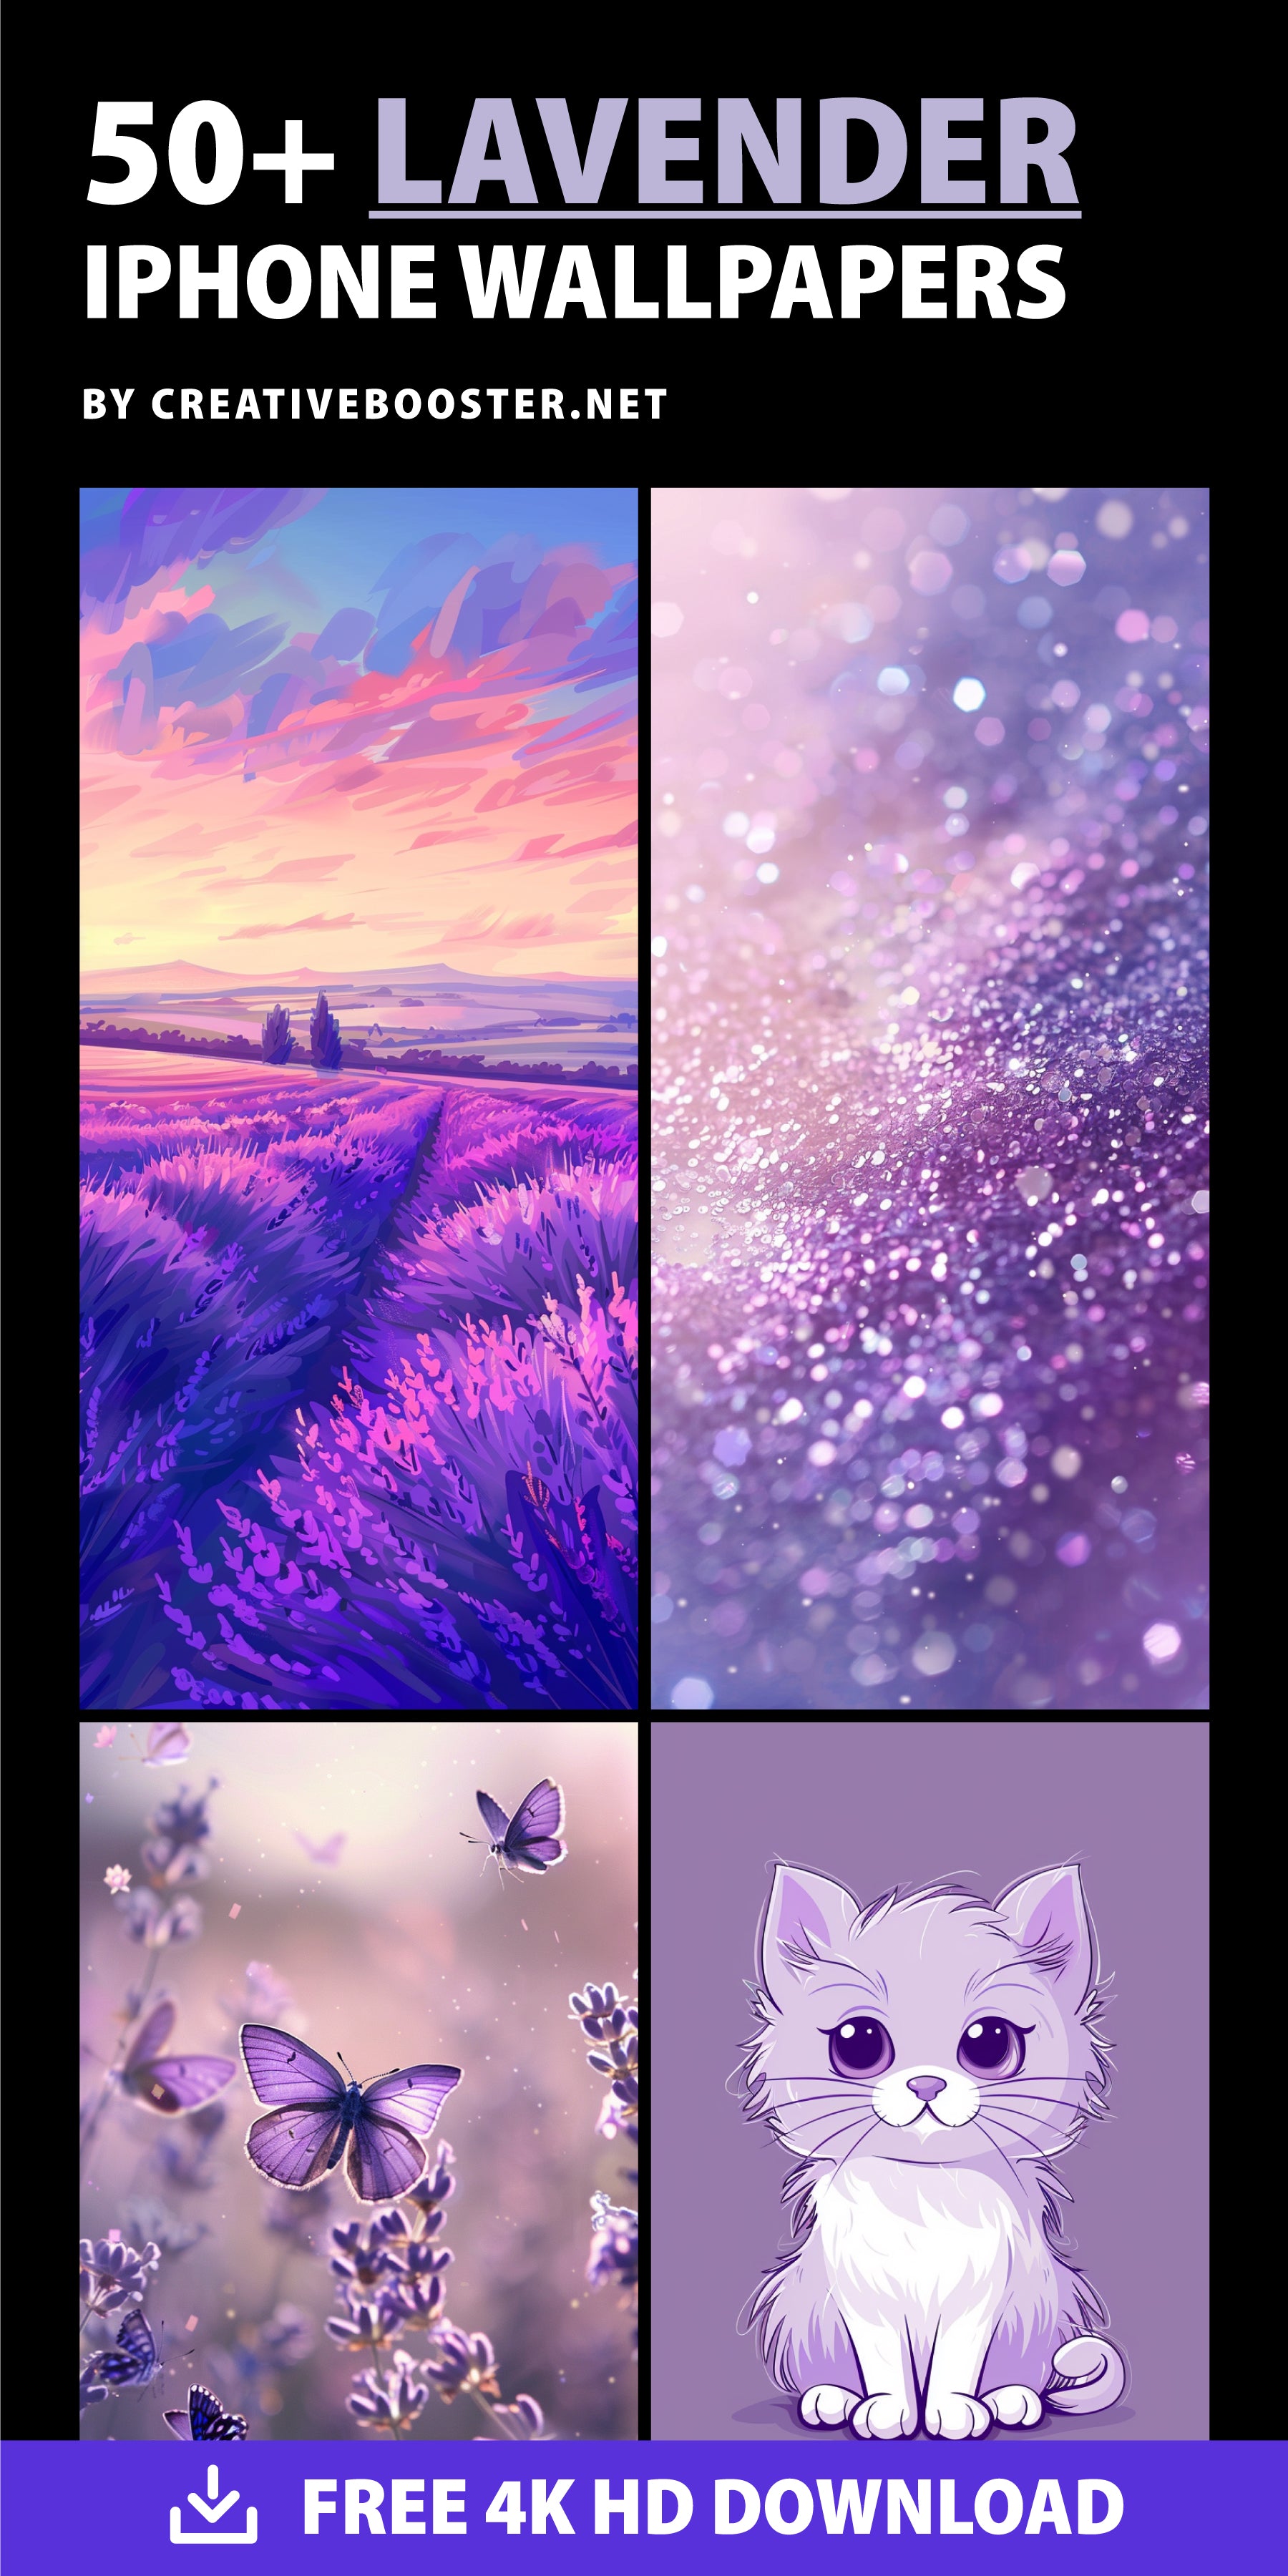 Lavender-iPhone-Wallpapers-Free-4k-HD-Download-Pinterest